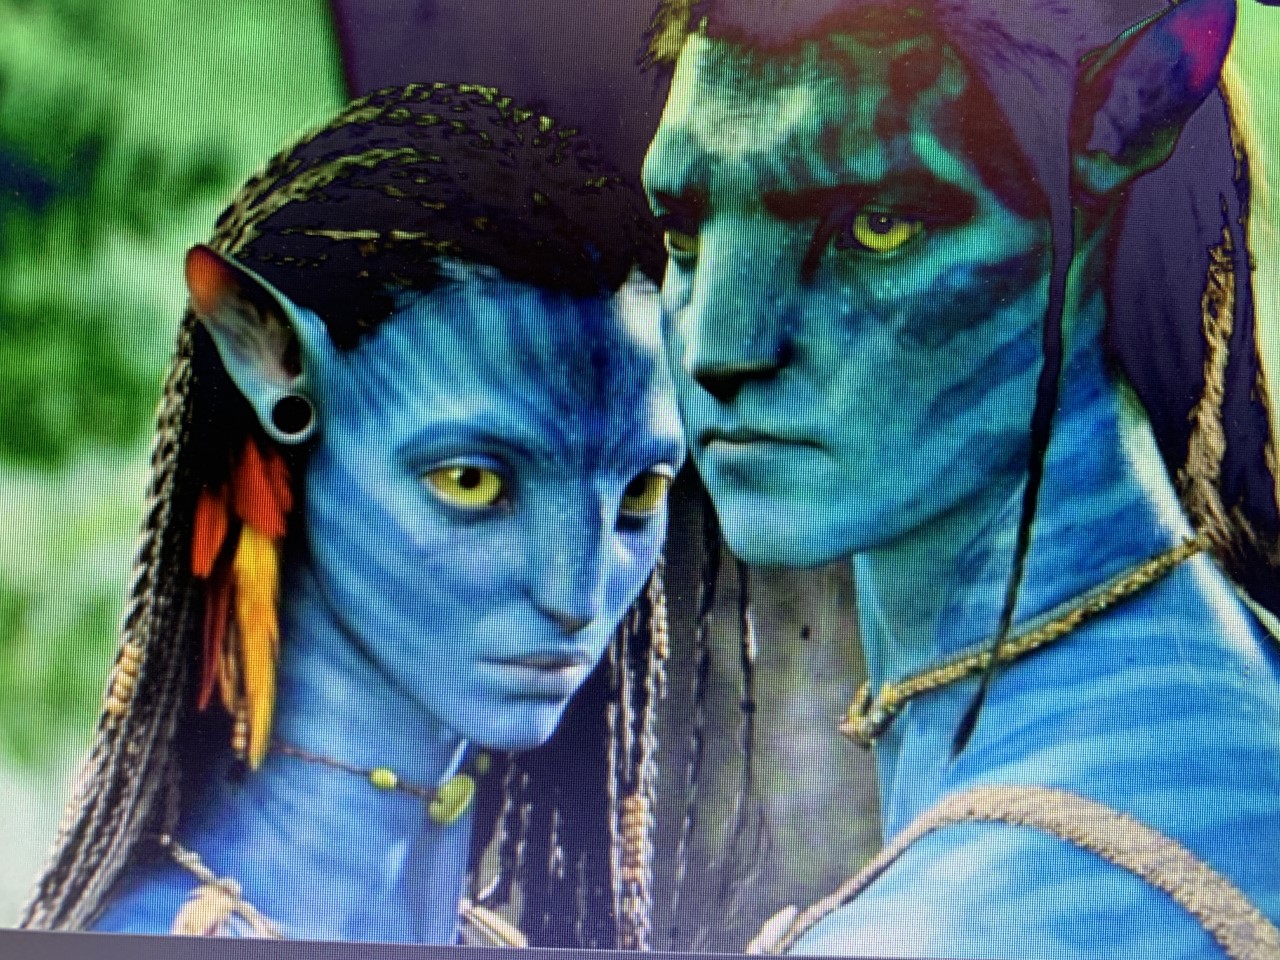 New in Theaters: The Re-Release of “Avatar” in 4K